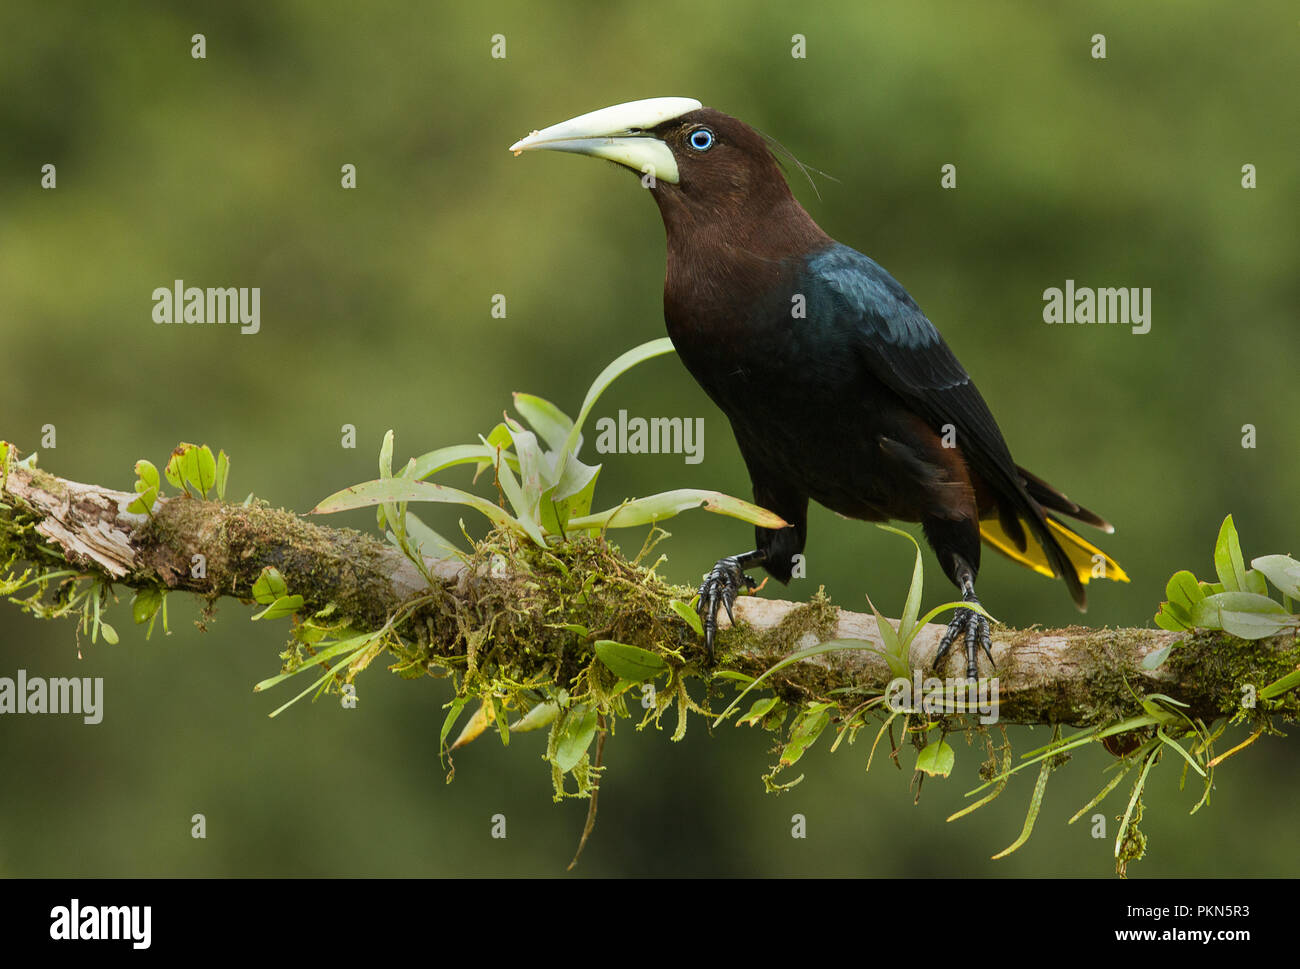 A perched chestnut headed oropendola photographed in Costa Rica Stock Photo